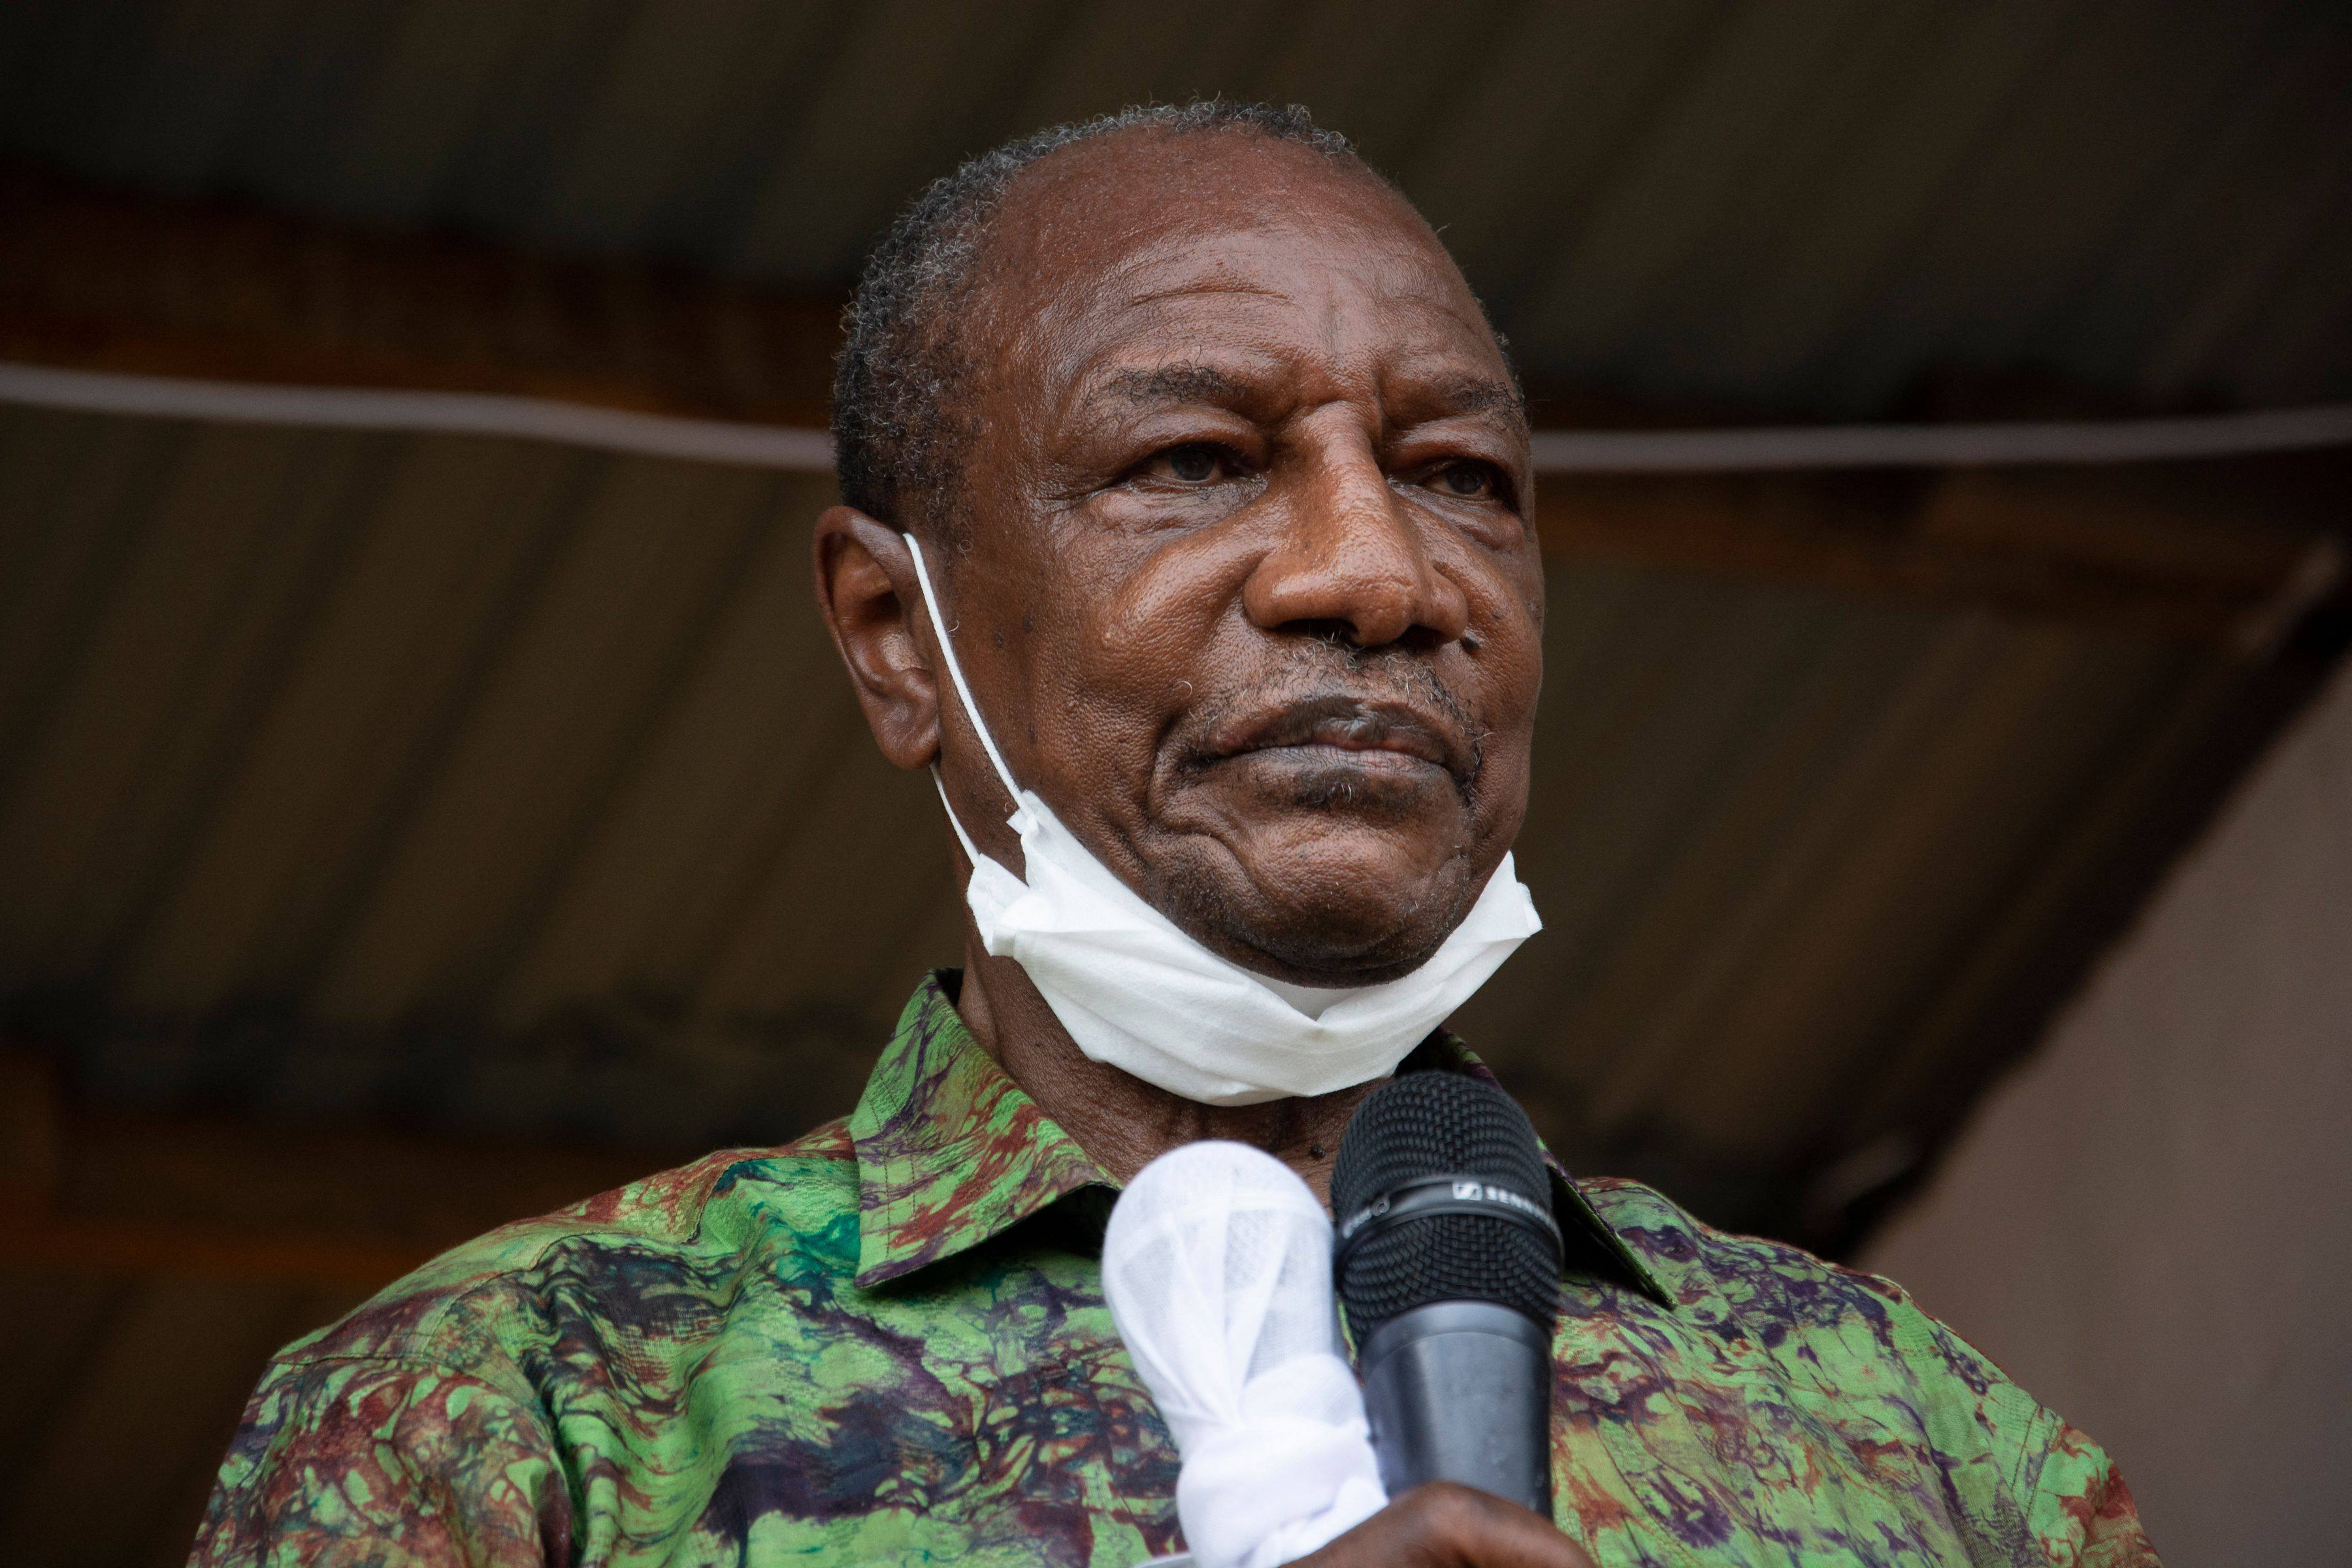 Former Guinean President resident Alpha Condé has been charged with complicity in the violence that surrounded his controversial re-election for a third term back in 2020.